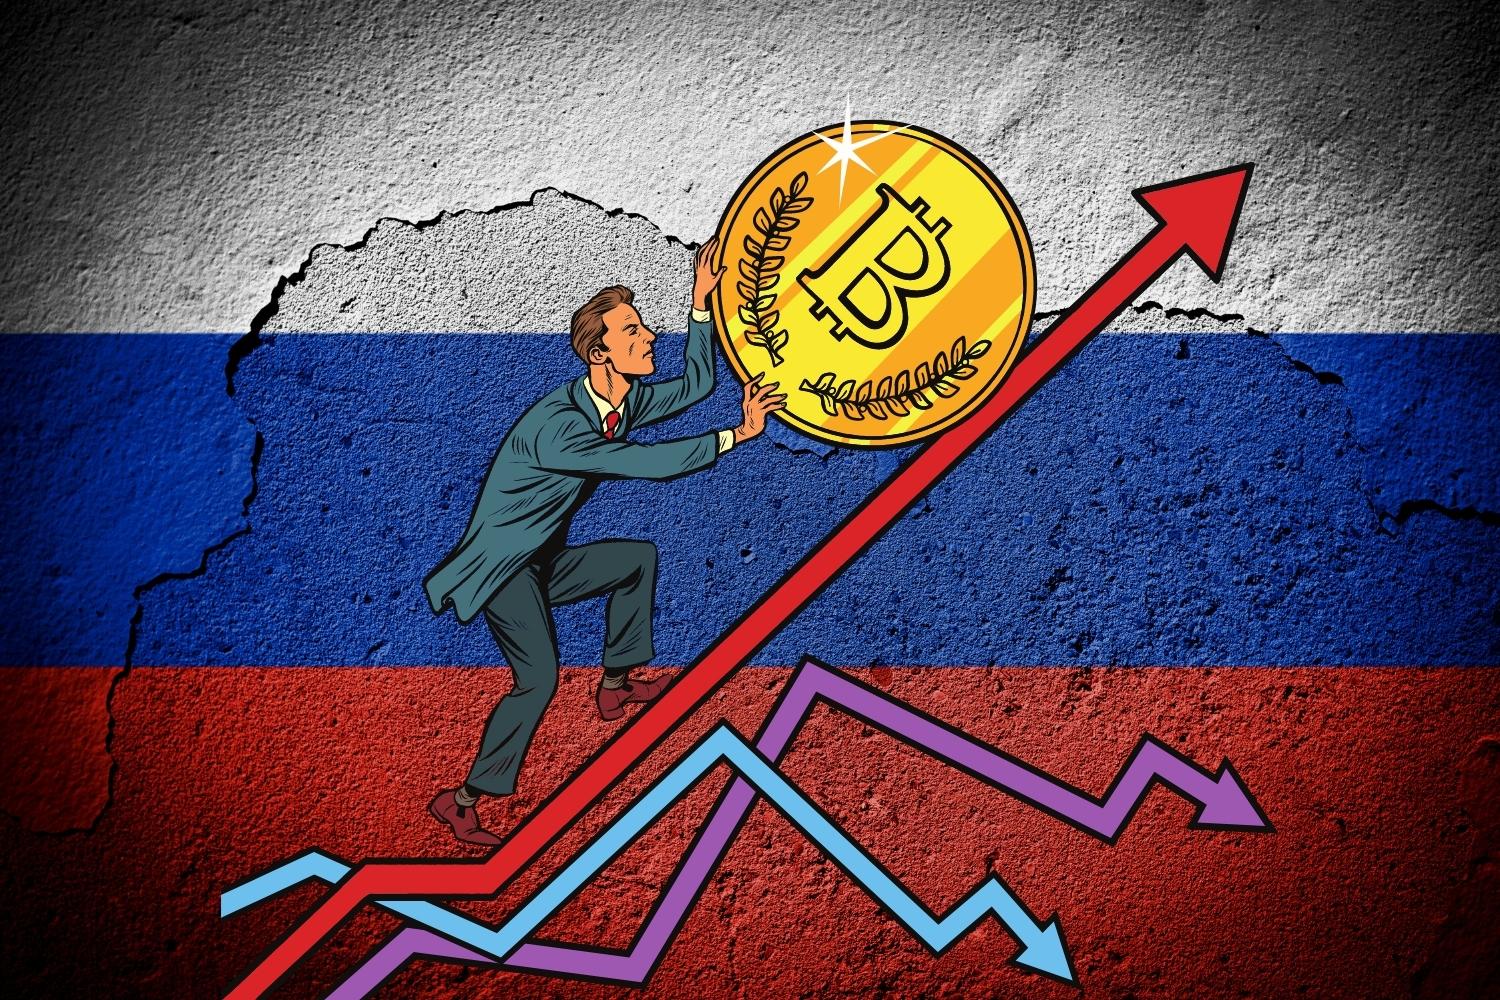 Bitcoin Price Skyrocketing Thanks To Russia - DMARGE